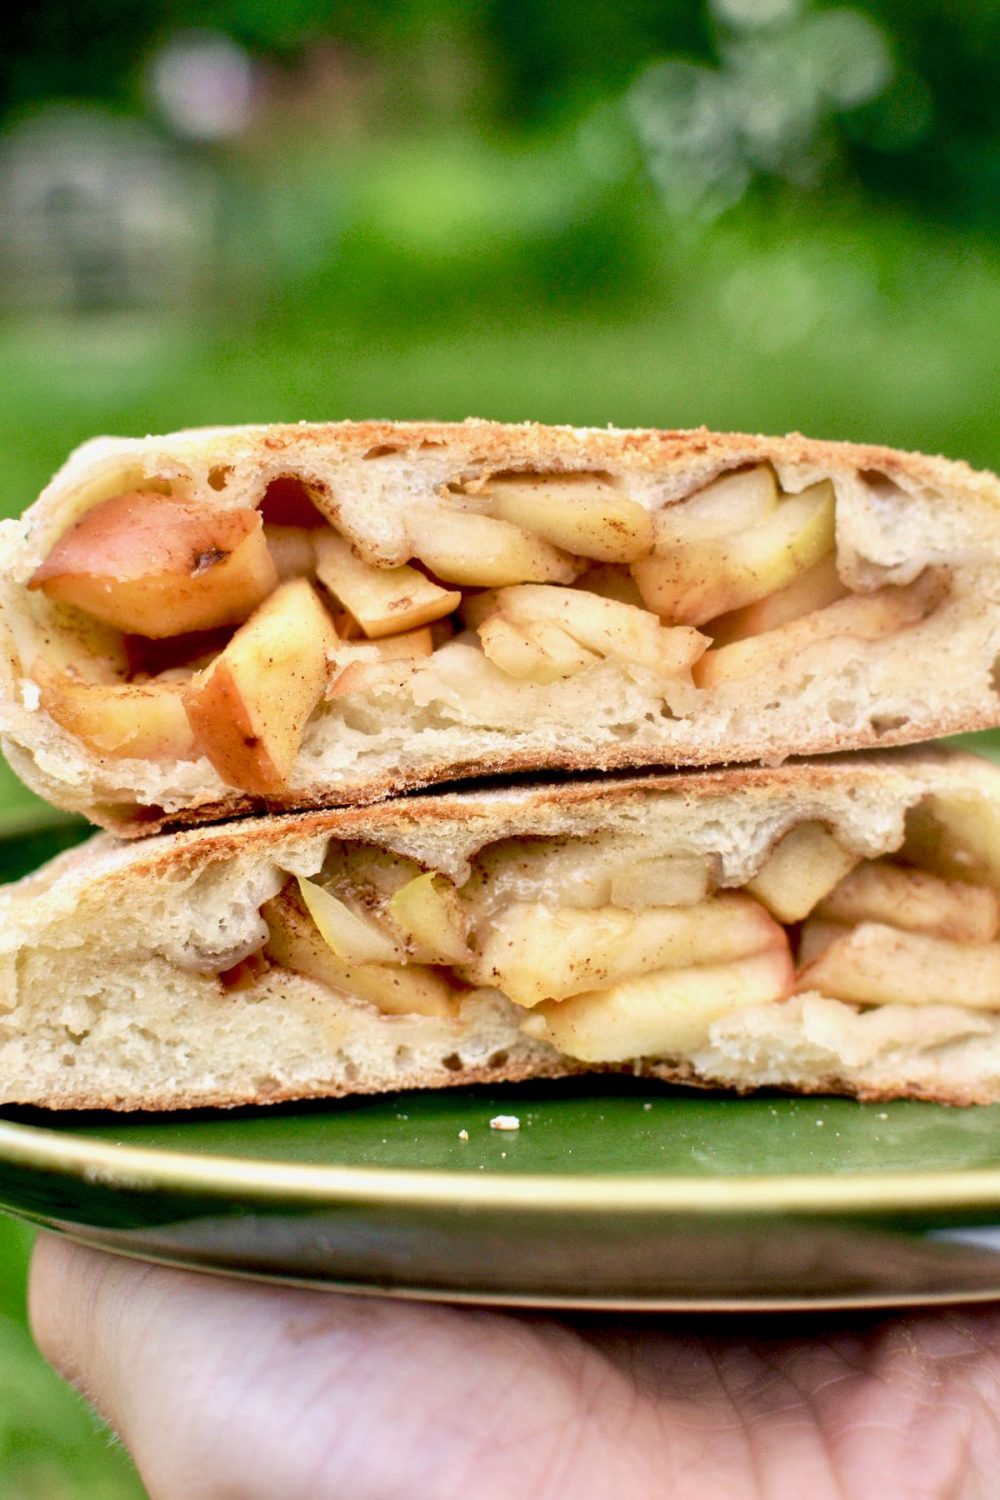 An applestrudel flavoured calzone. Its two halves are stacked on a plate, revealing the filling of apple and a sprinkle of cinnamon.